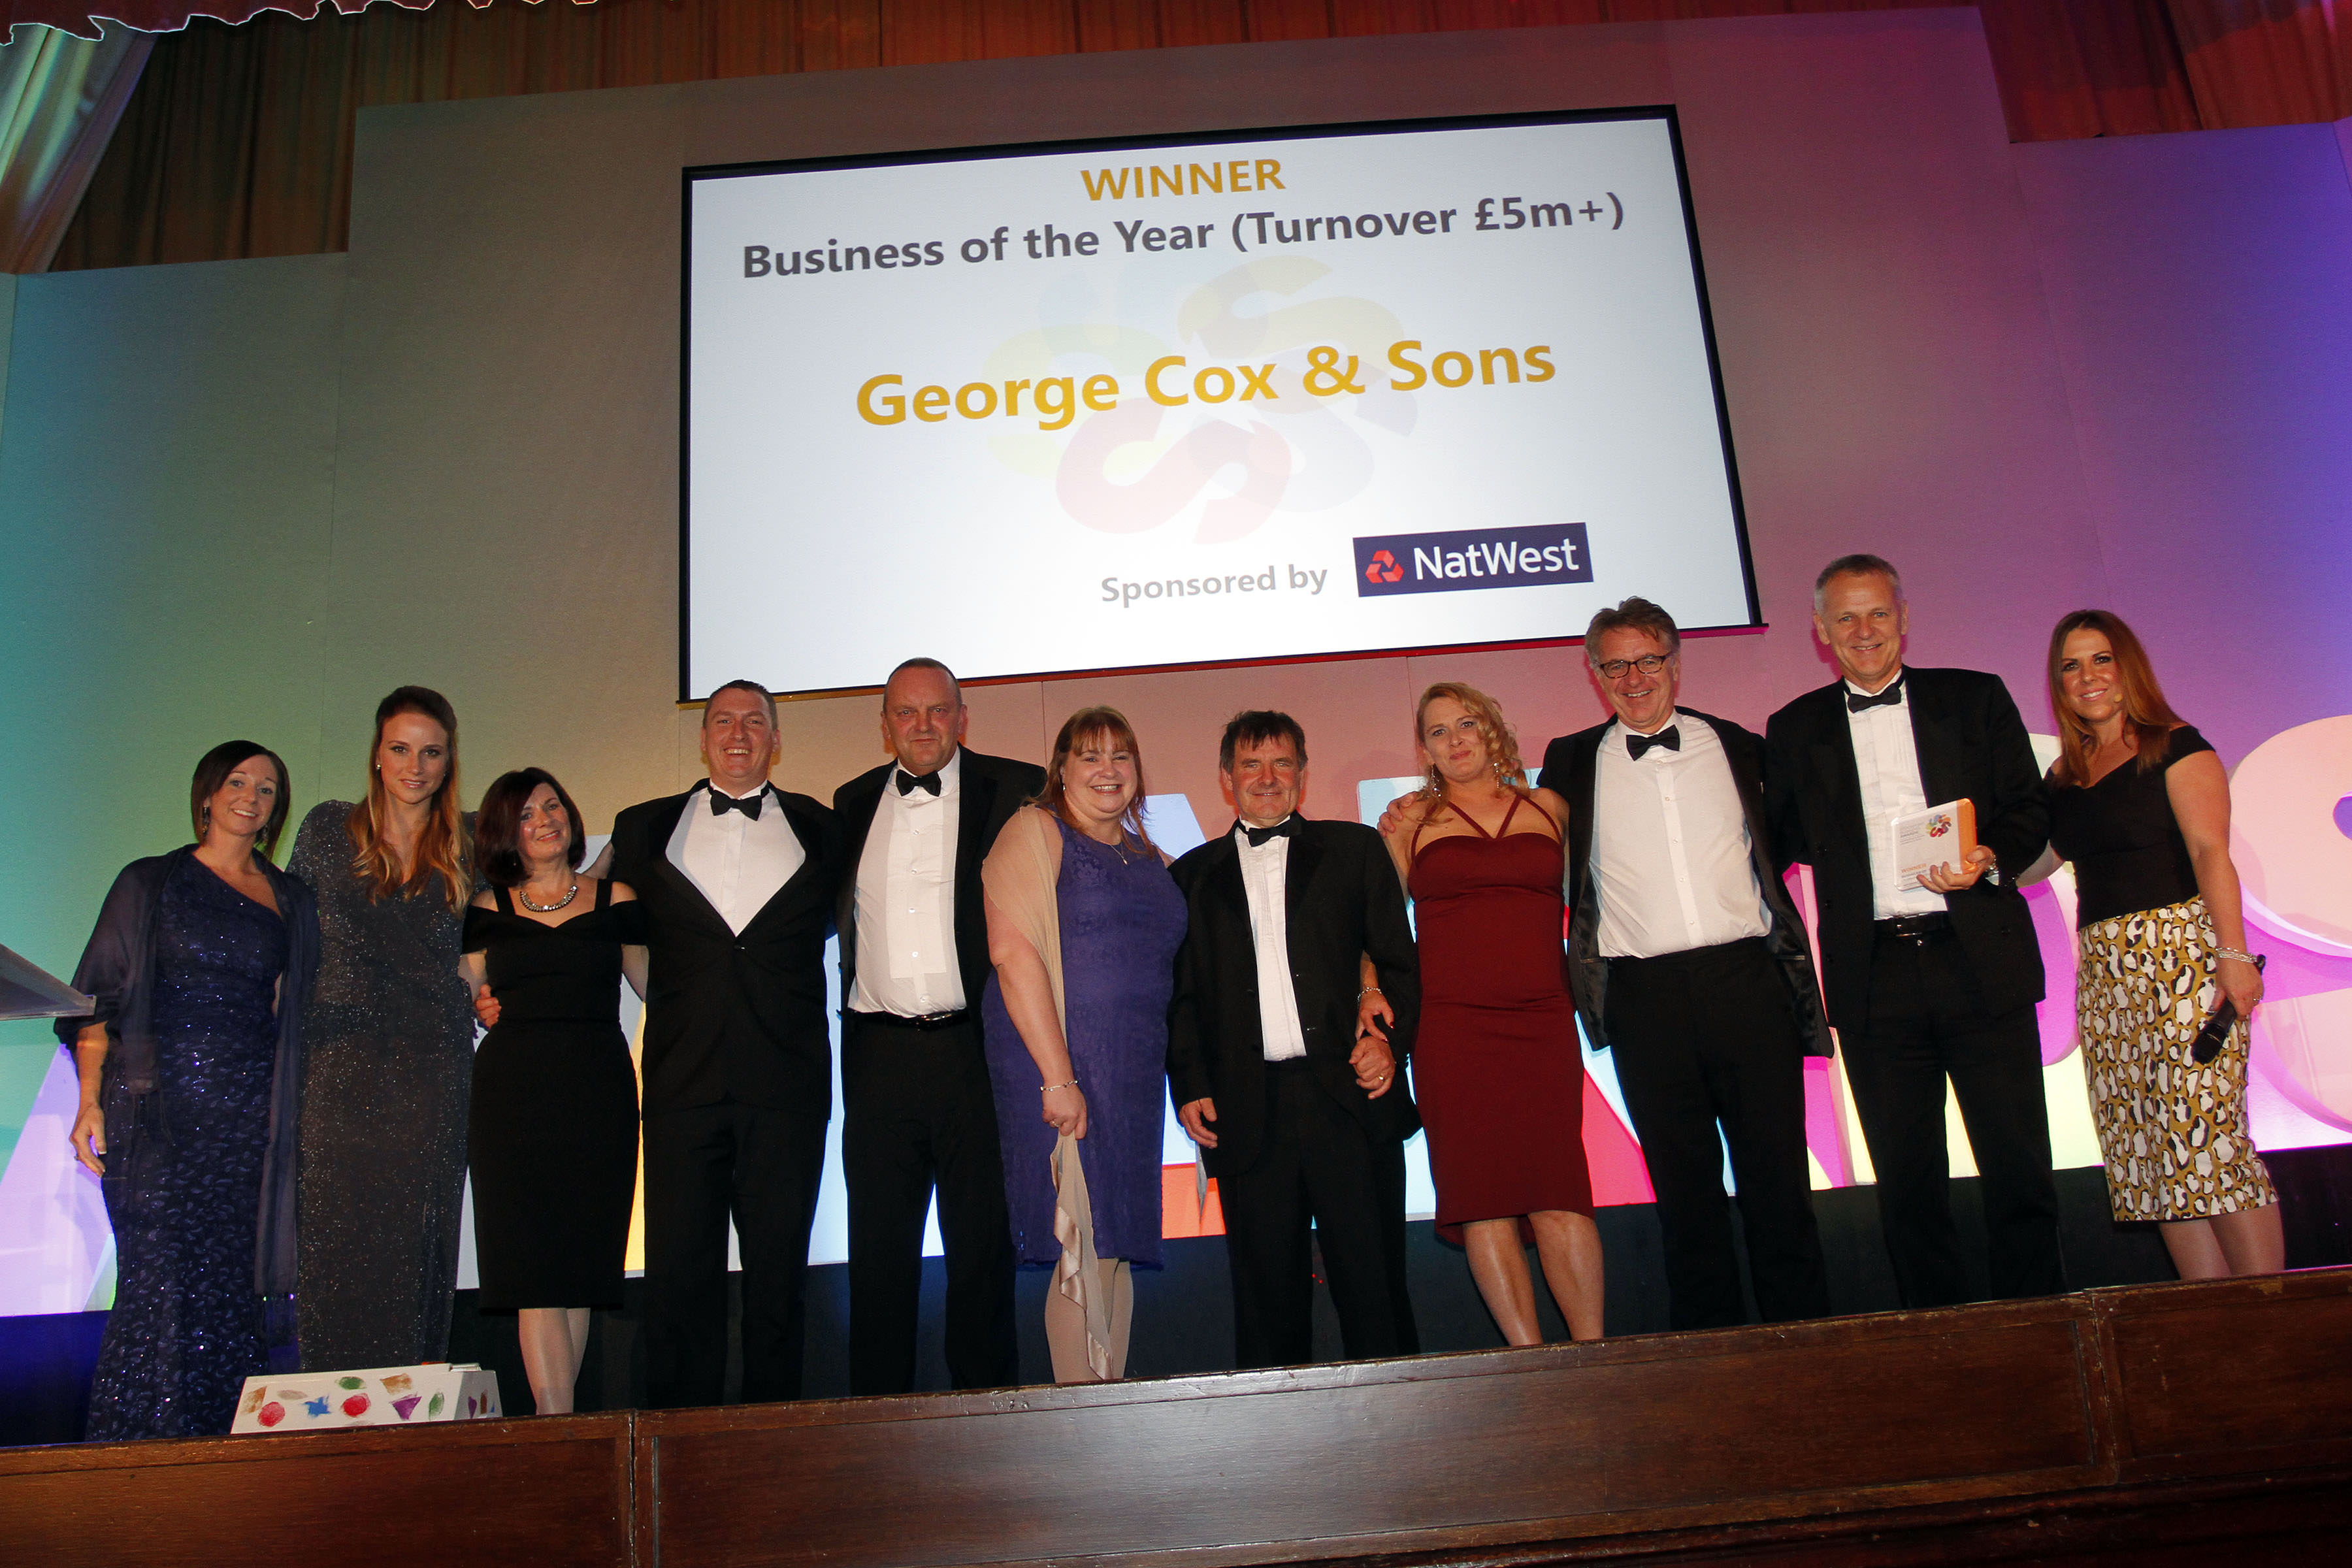 Business of the Year (over £5m) Winner